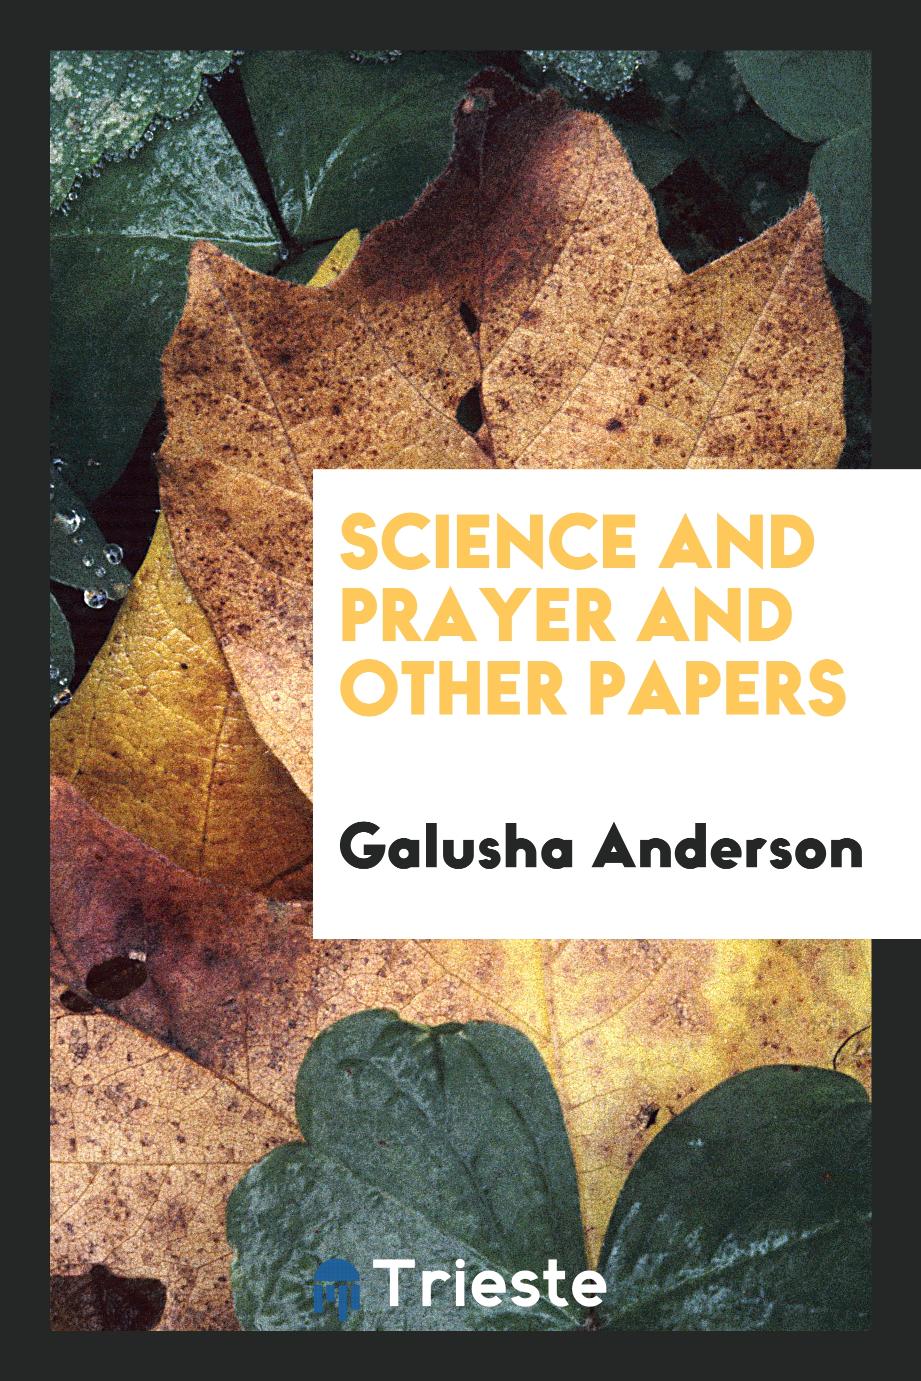 Science and prayer and other papers